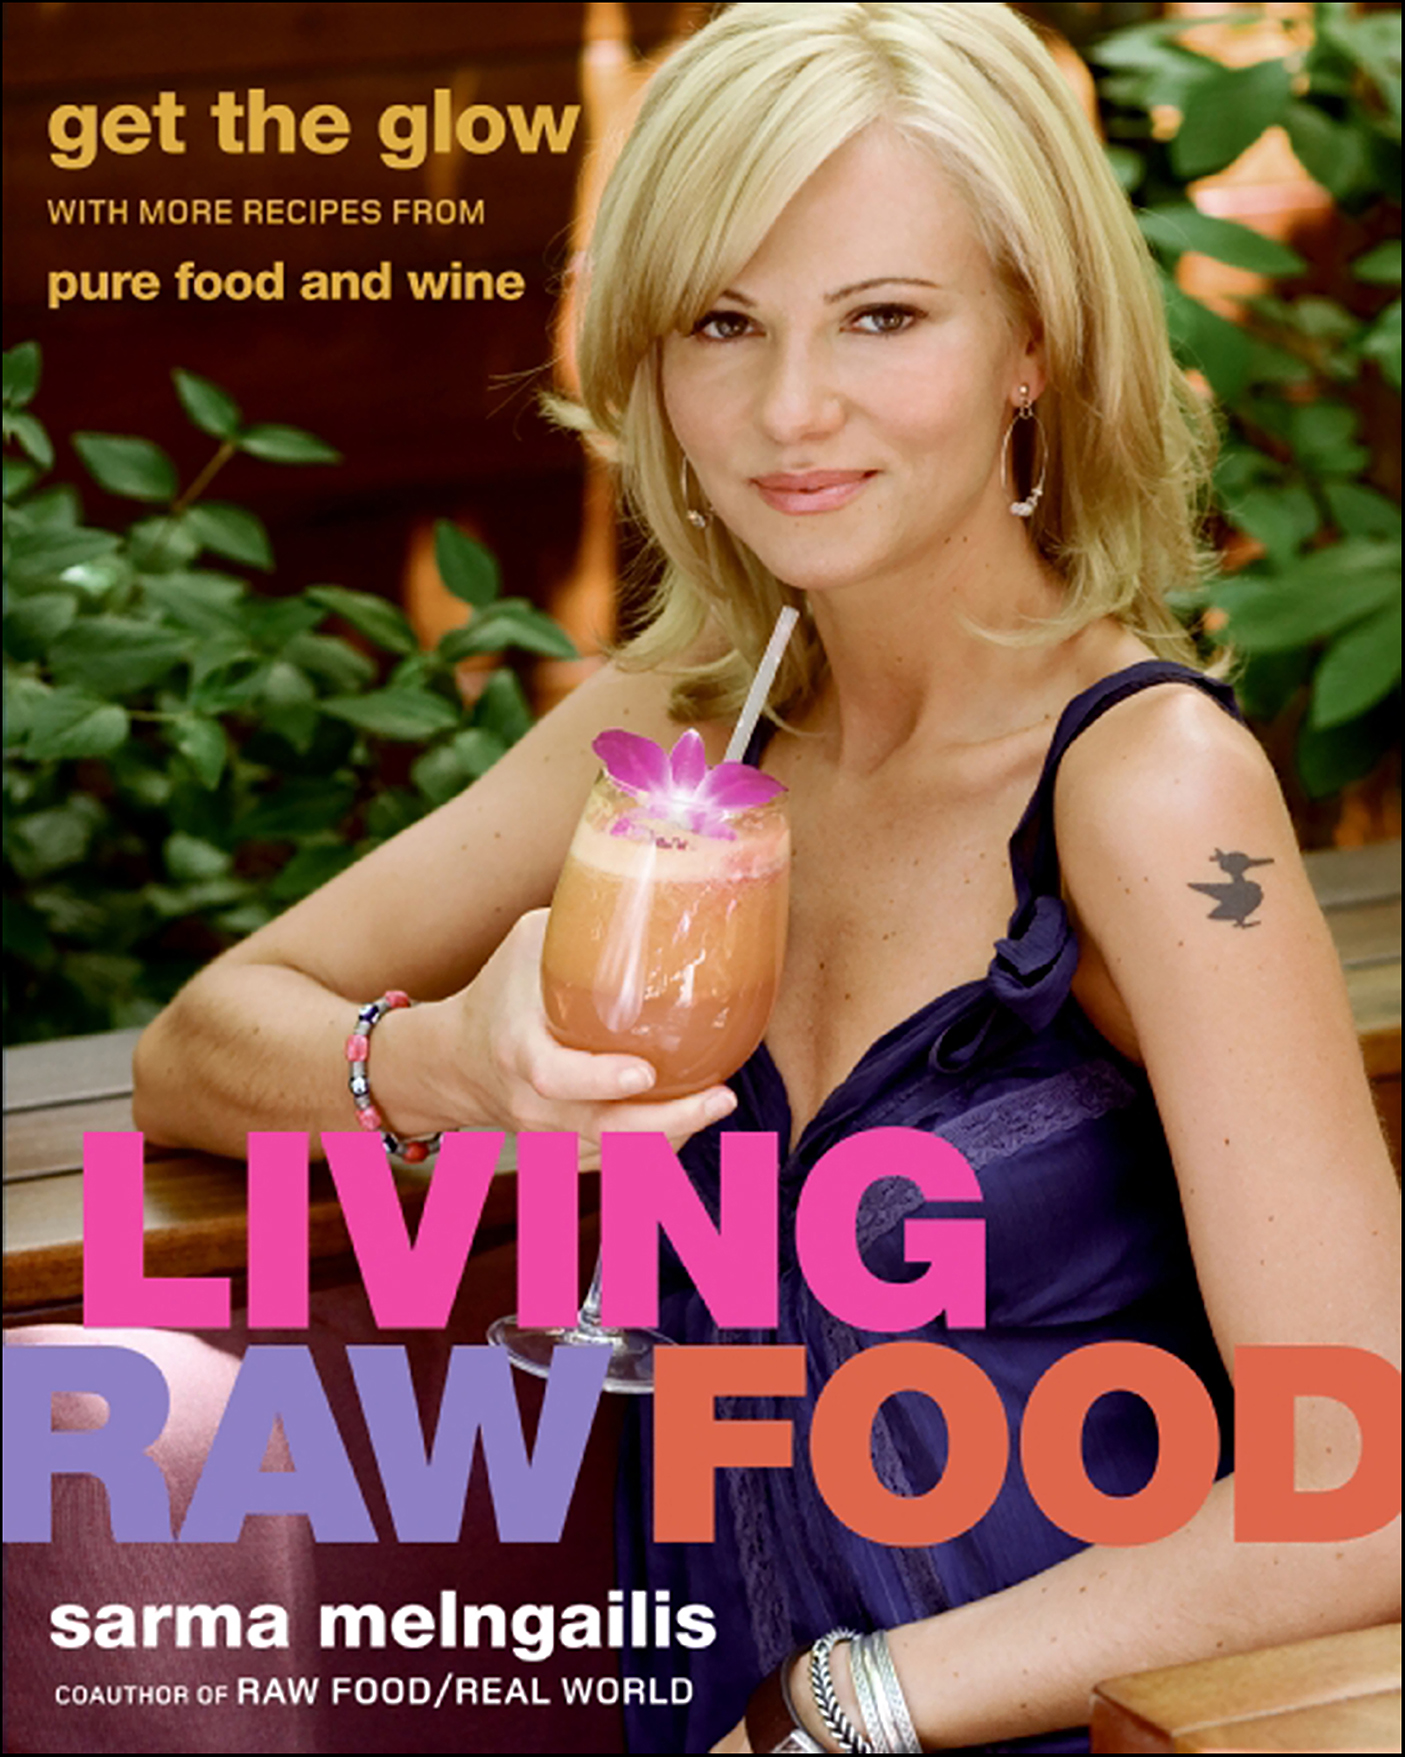 Living raw food get the glow with more recipes from Pure Food and Wine cover image